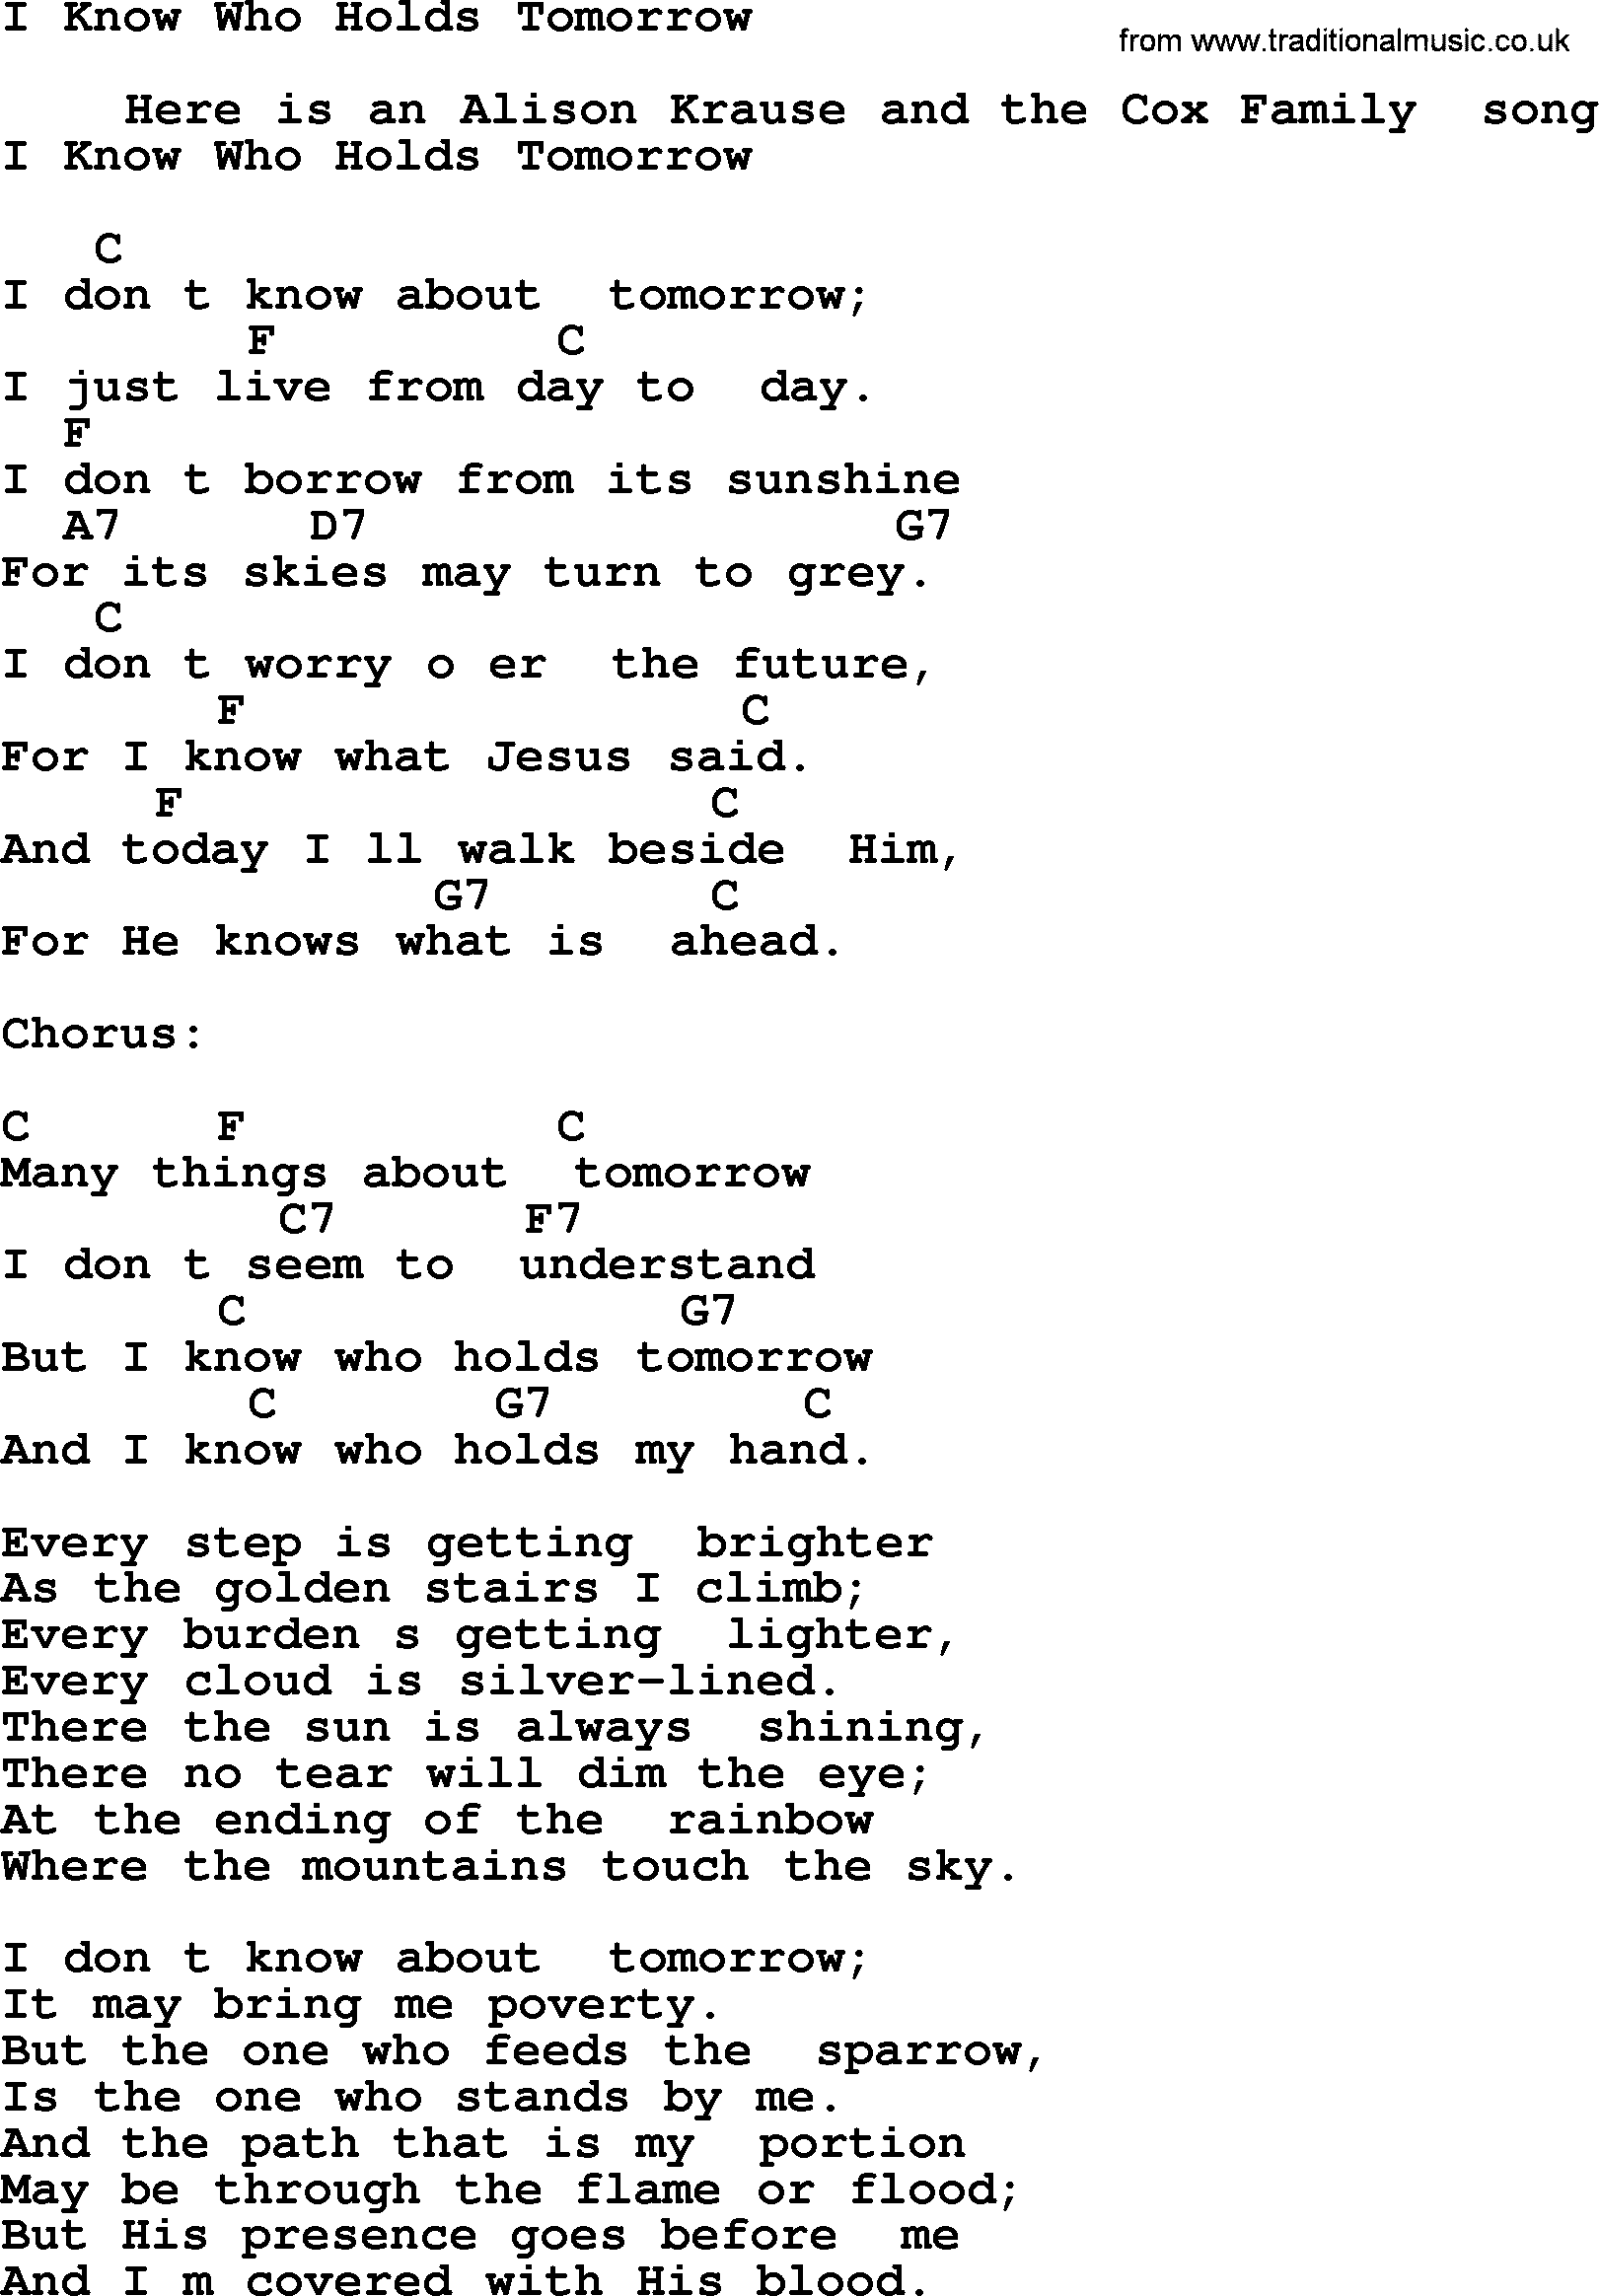 Bluegrass song: I Know Who Holds Tomorrow, lyrics and chords